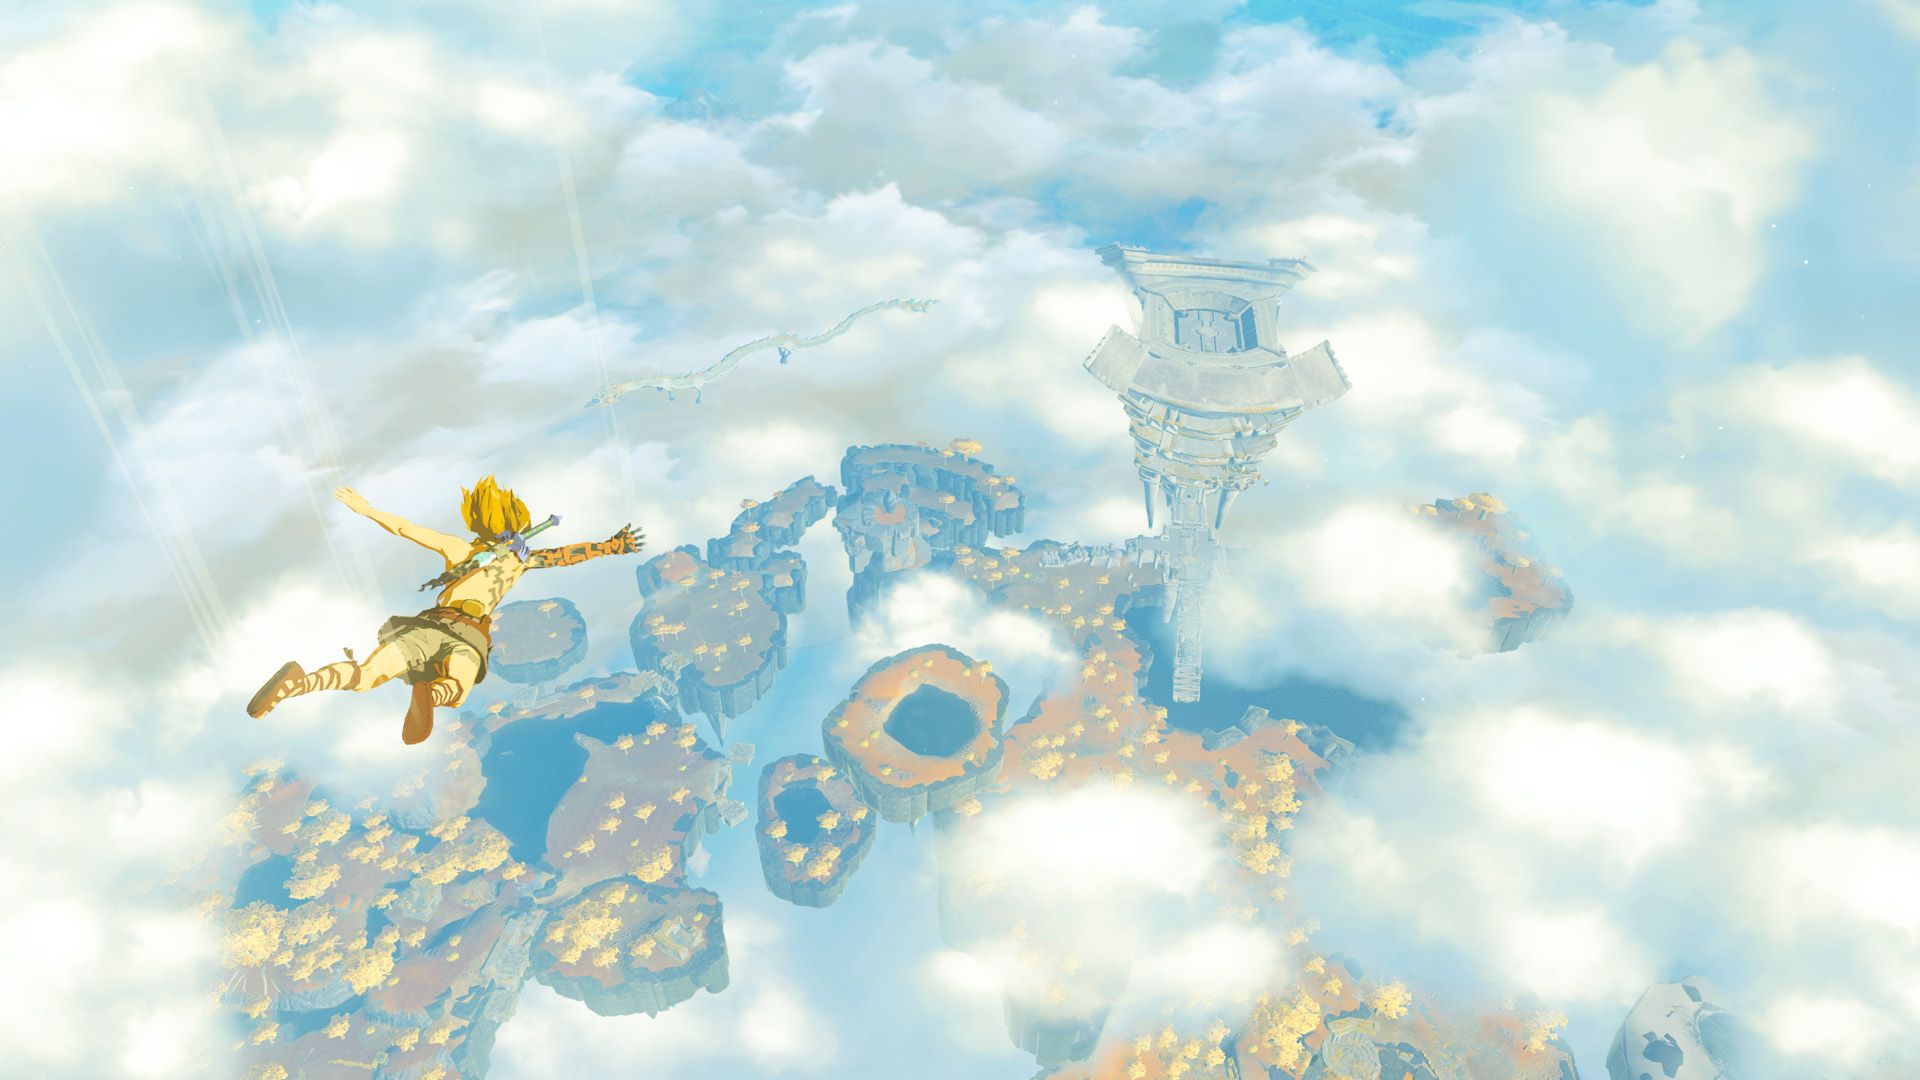 Link falling to the Great Sky Islands